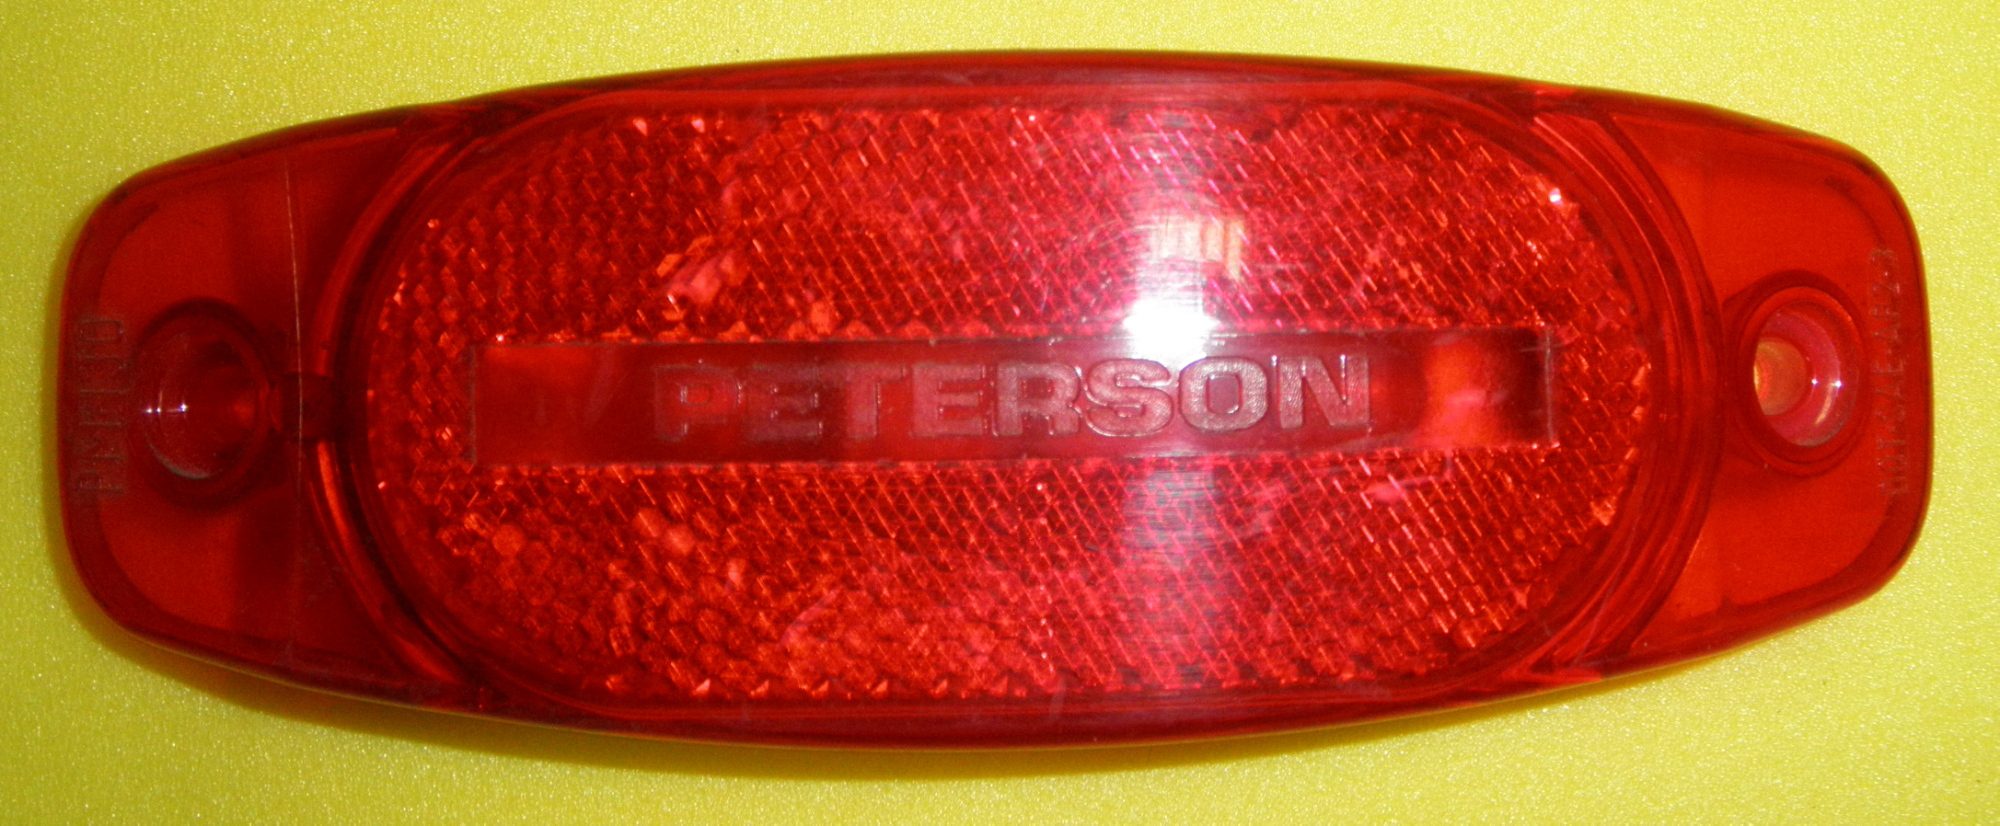 Peterson Manufacturing M130R Clearance Light 